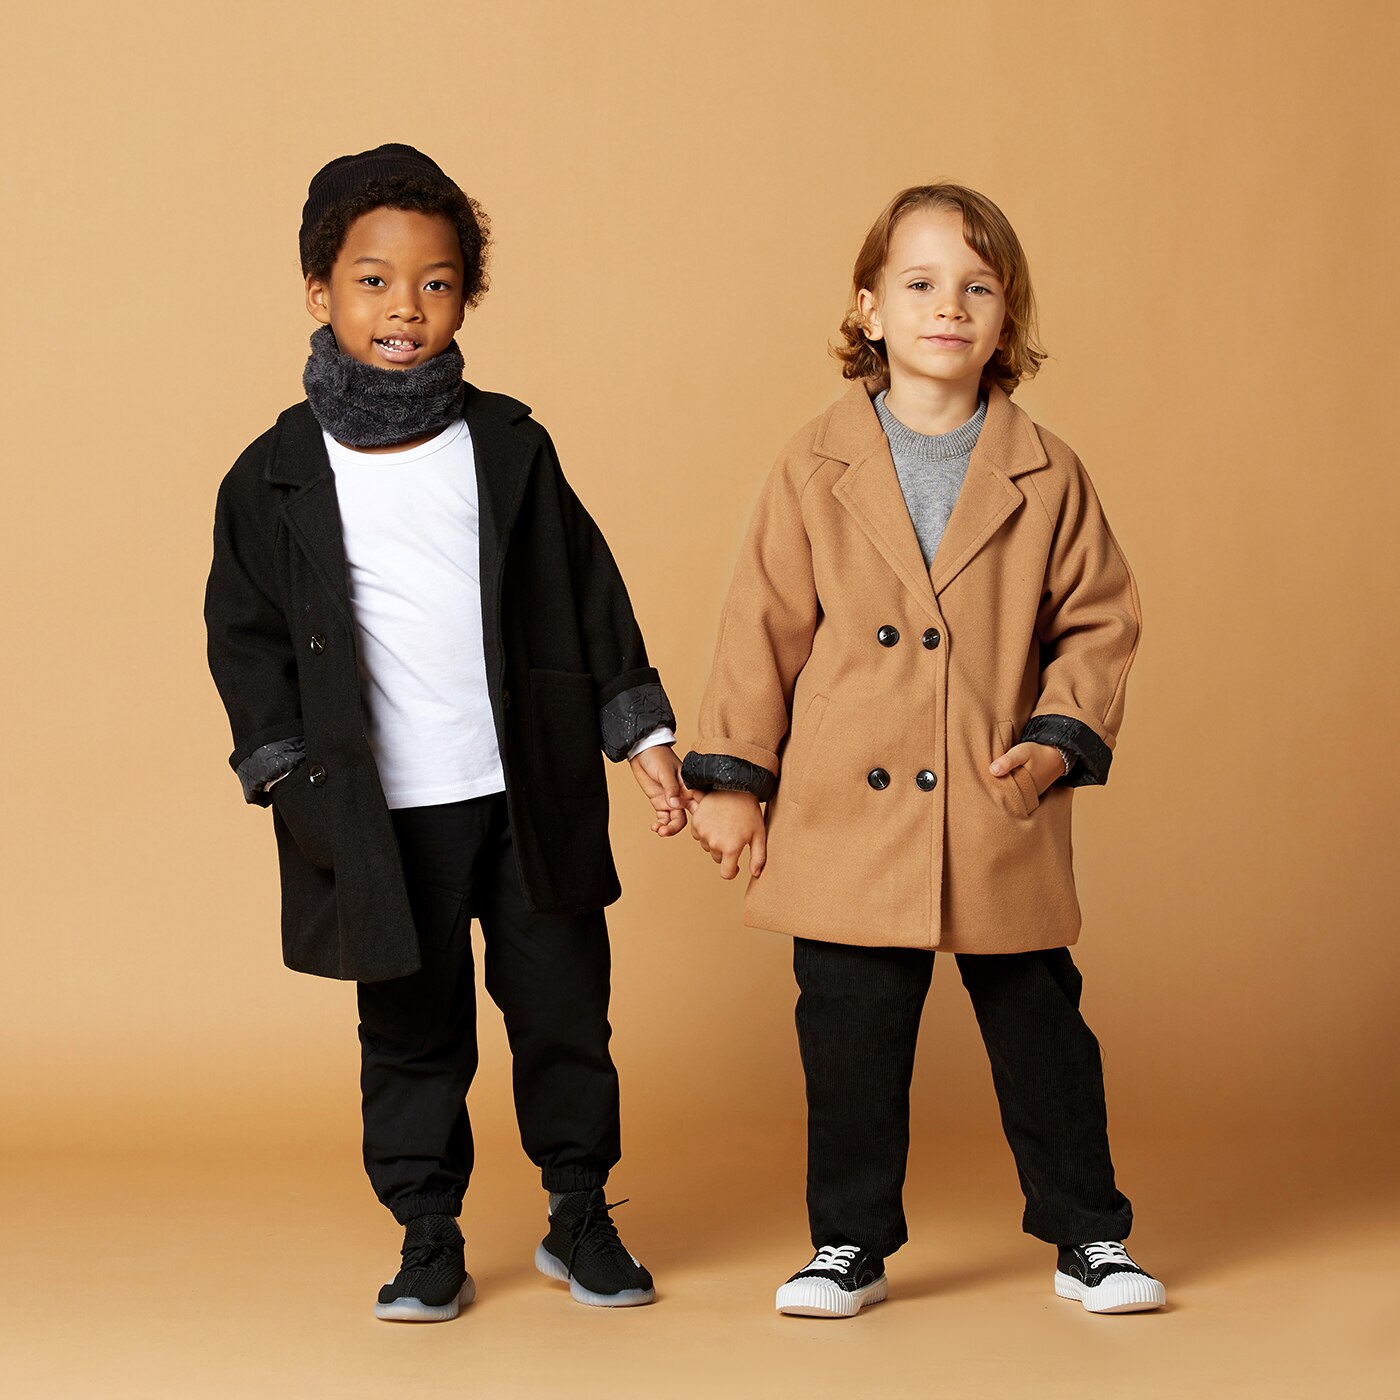 PatPat Winter Kids Boys Girl Grid Jackets Lapel Collar Double Breasted Coat Baby Boy Trench Coat Autumn Kids Outerwear Coats